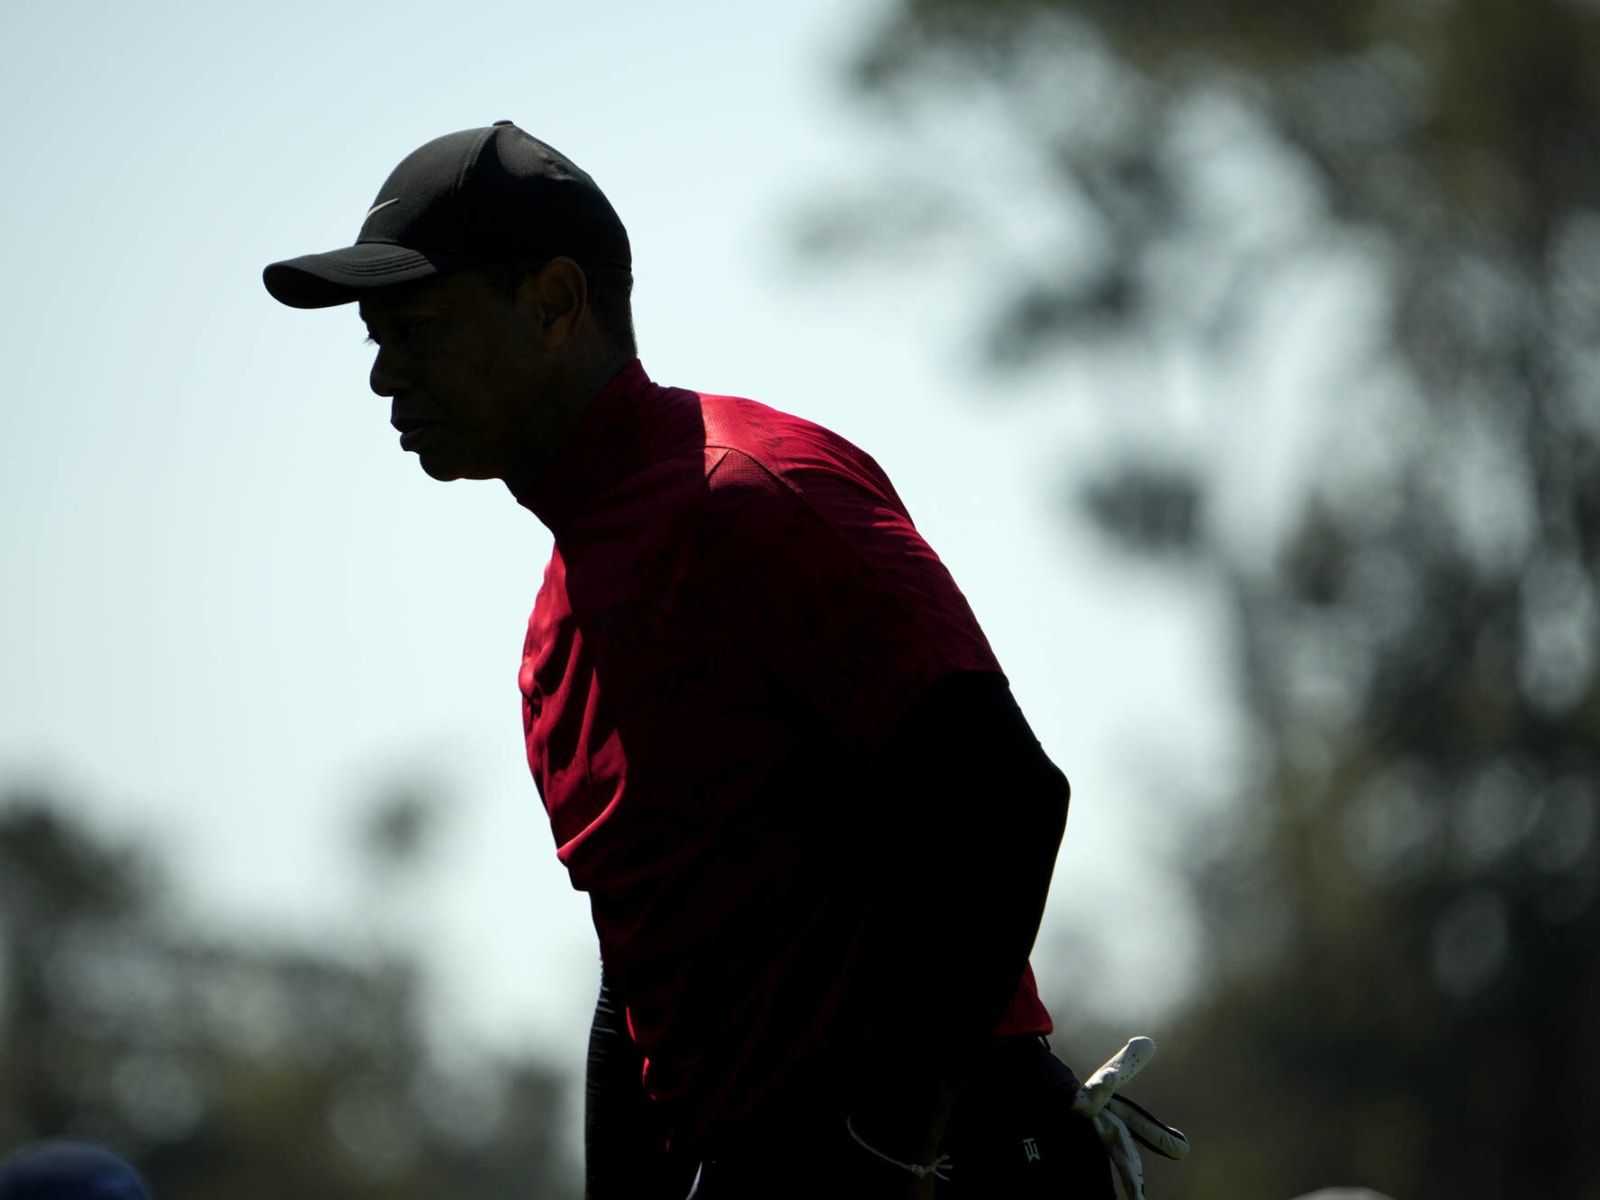 Tiger Woods' Masters Odds for 2023 & More Ways to Bet Woods at Augusta